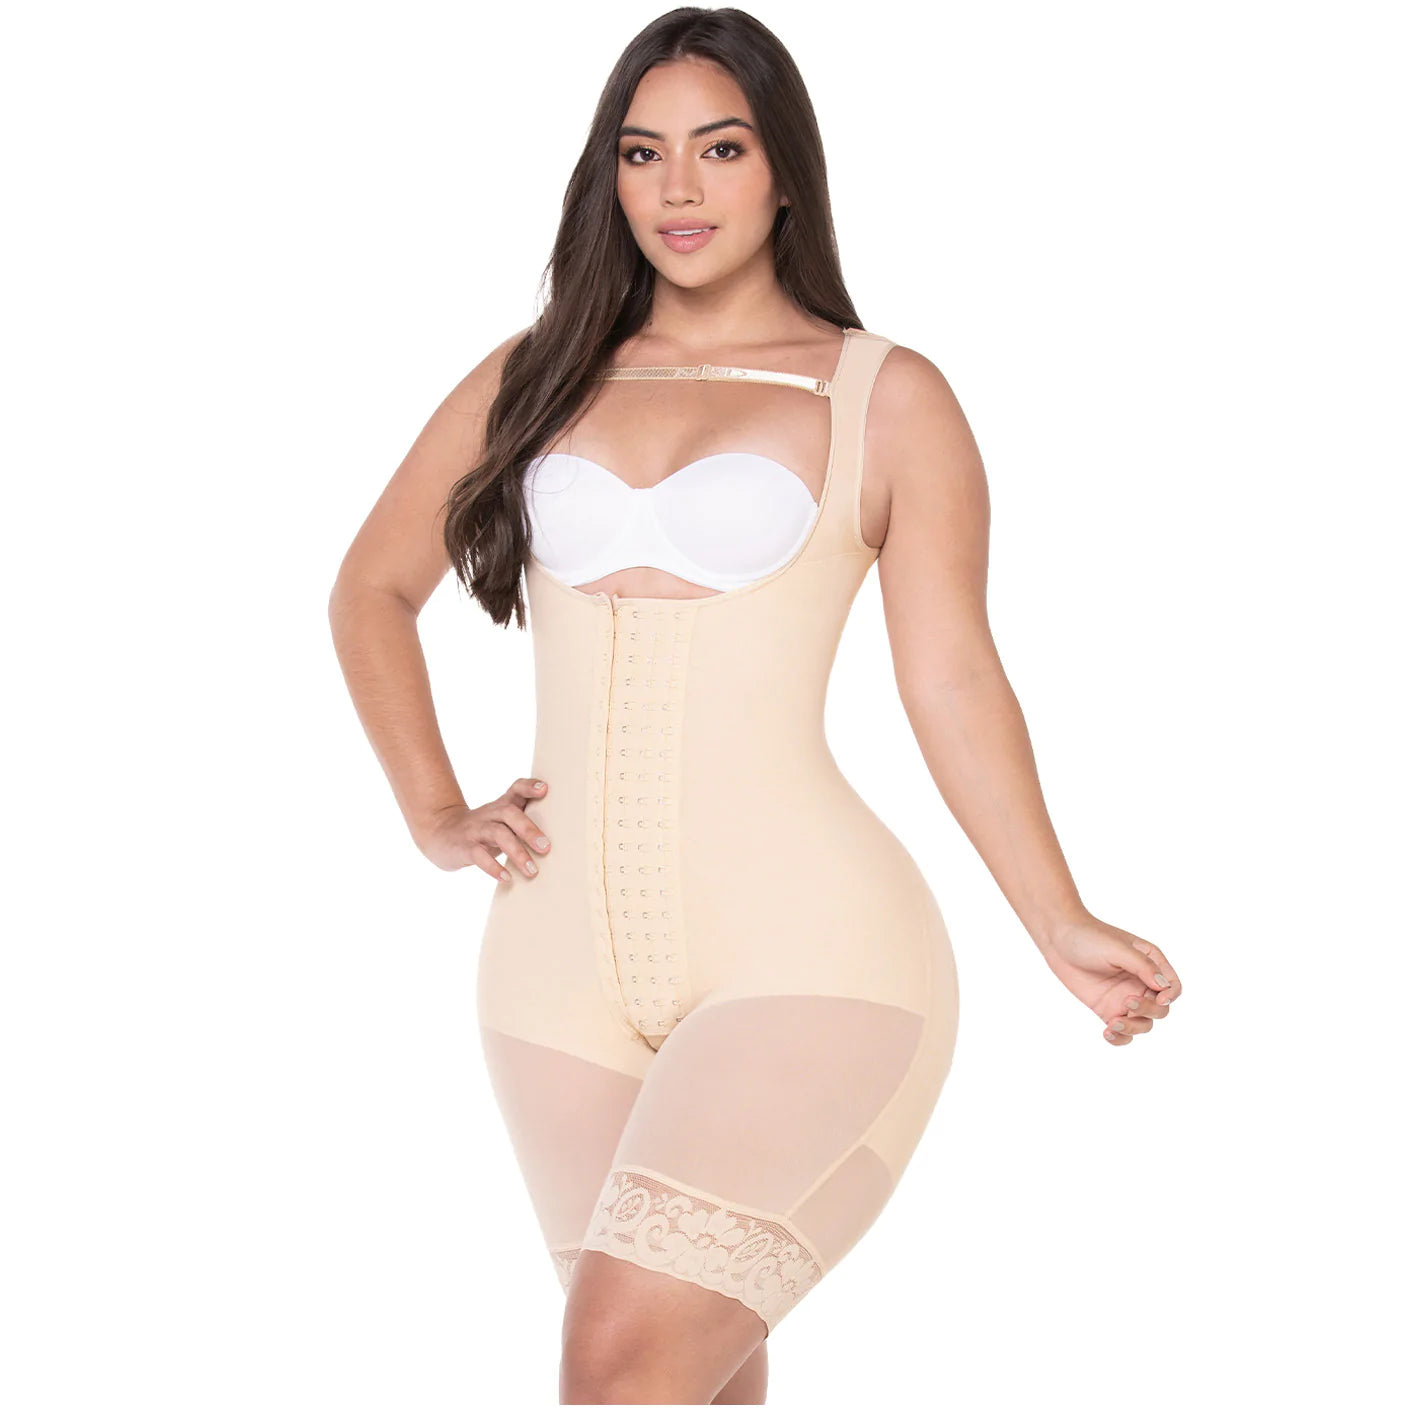 Fajas MYD F00485 | Fajas Colombianas Post Surgery Mid Thigh Shapewear Bodysuit for Guitar and Hourglass Body Types